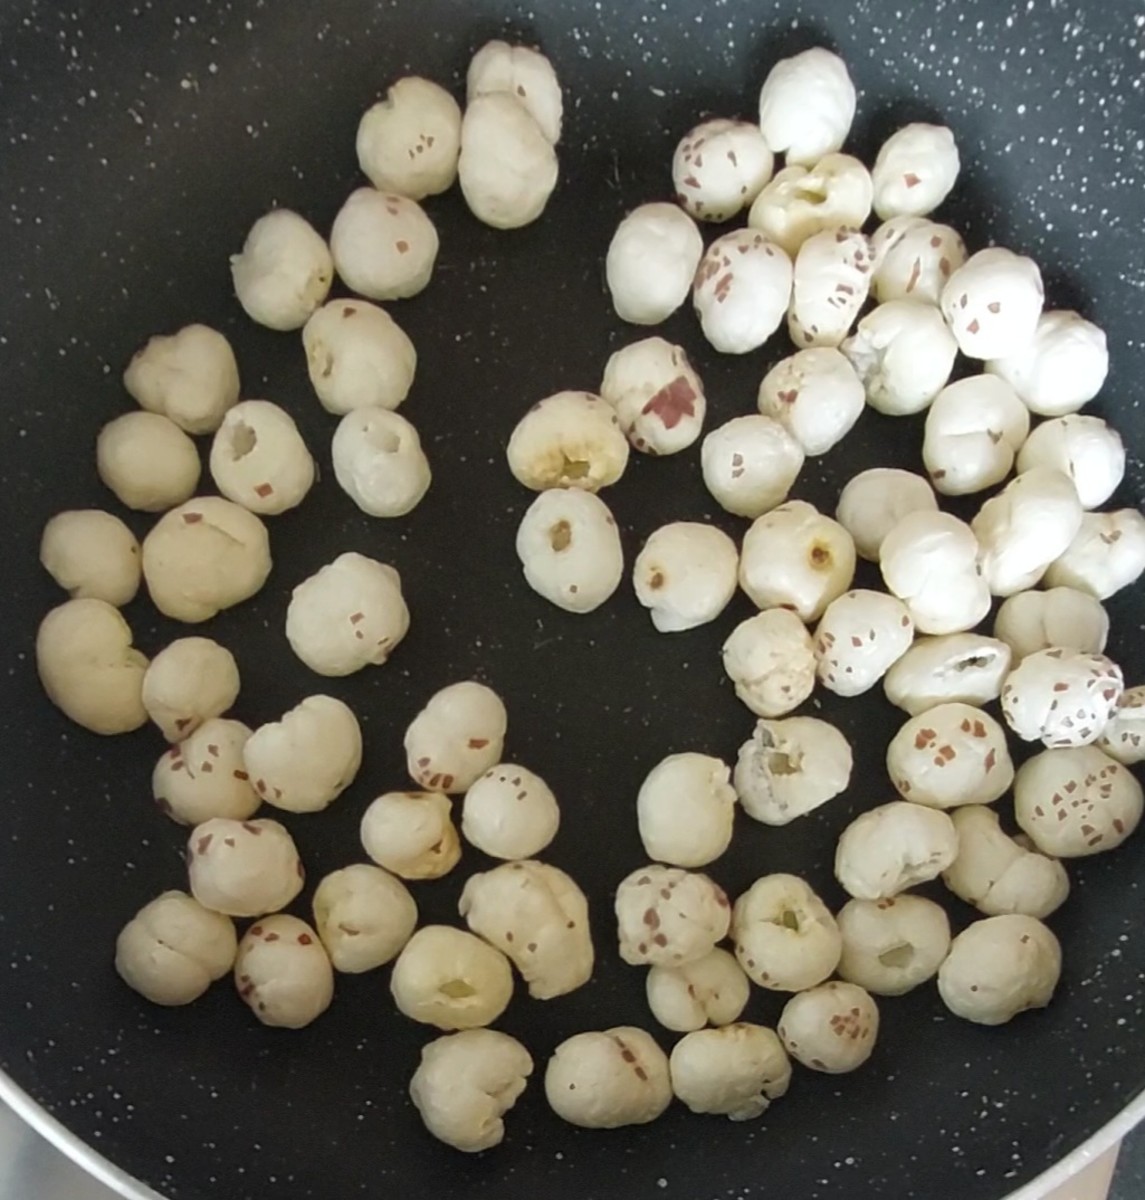 In a pan, add 1 cup of lotus seeds or makhana. Dry-fry over low flame for 2-3 minutes or till crispy (do not burn the seeds). Once done switch off the flame.